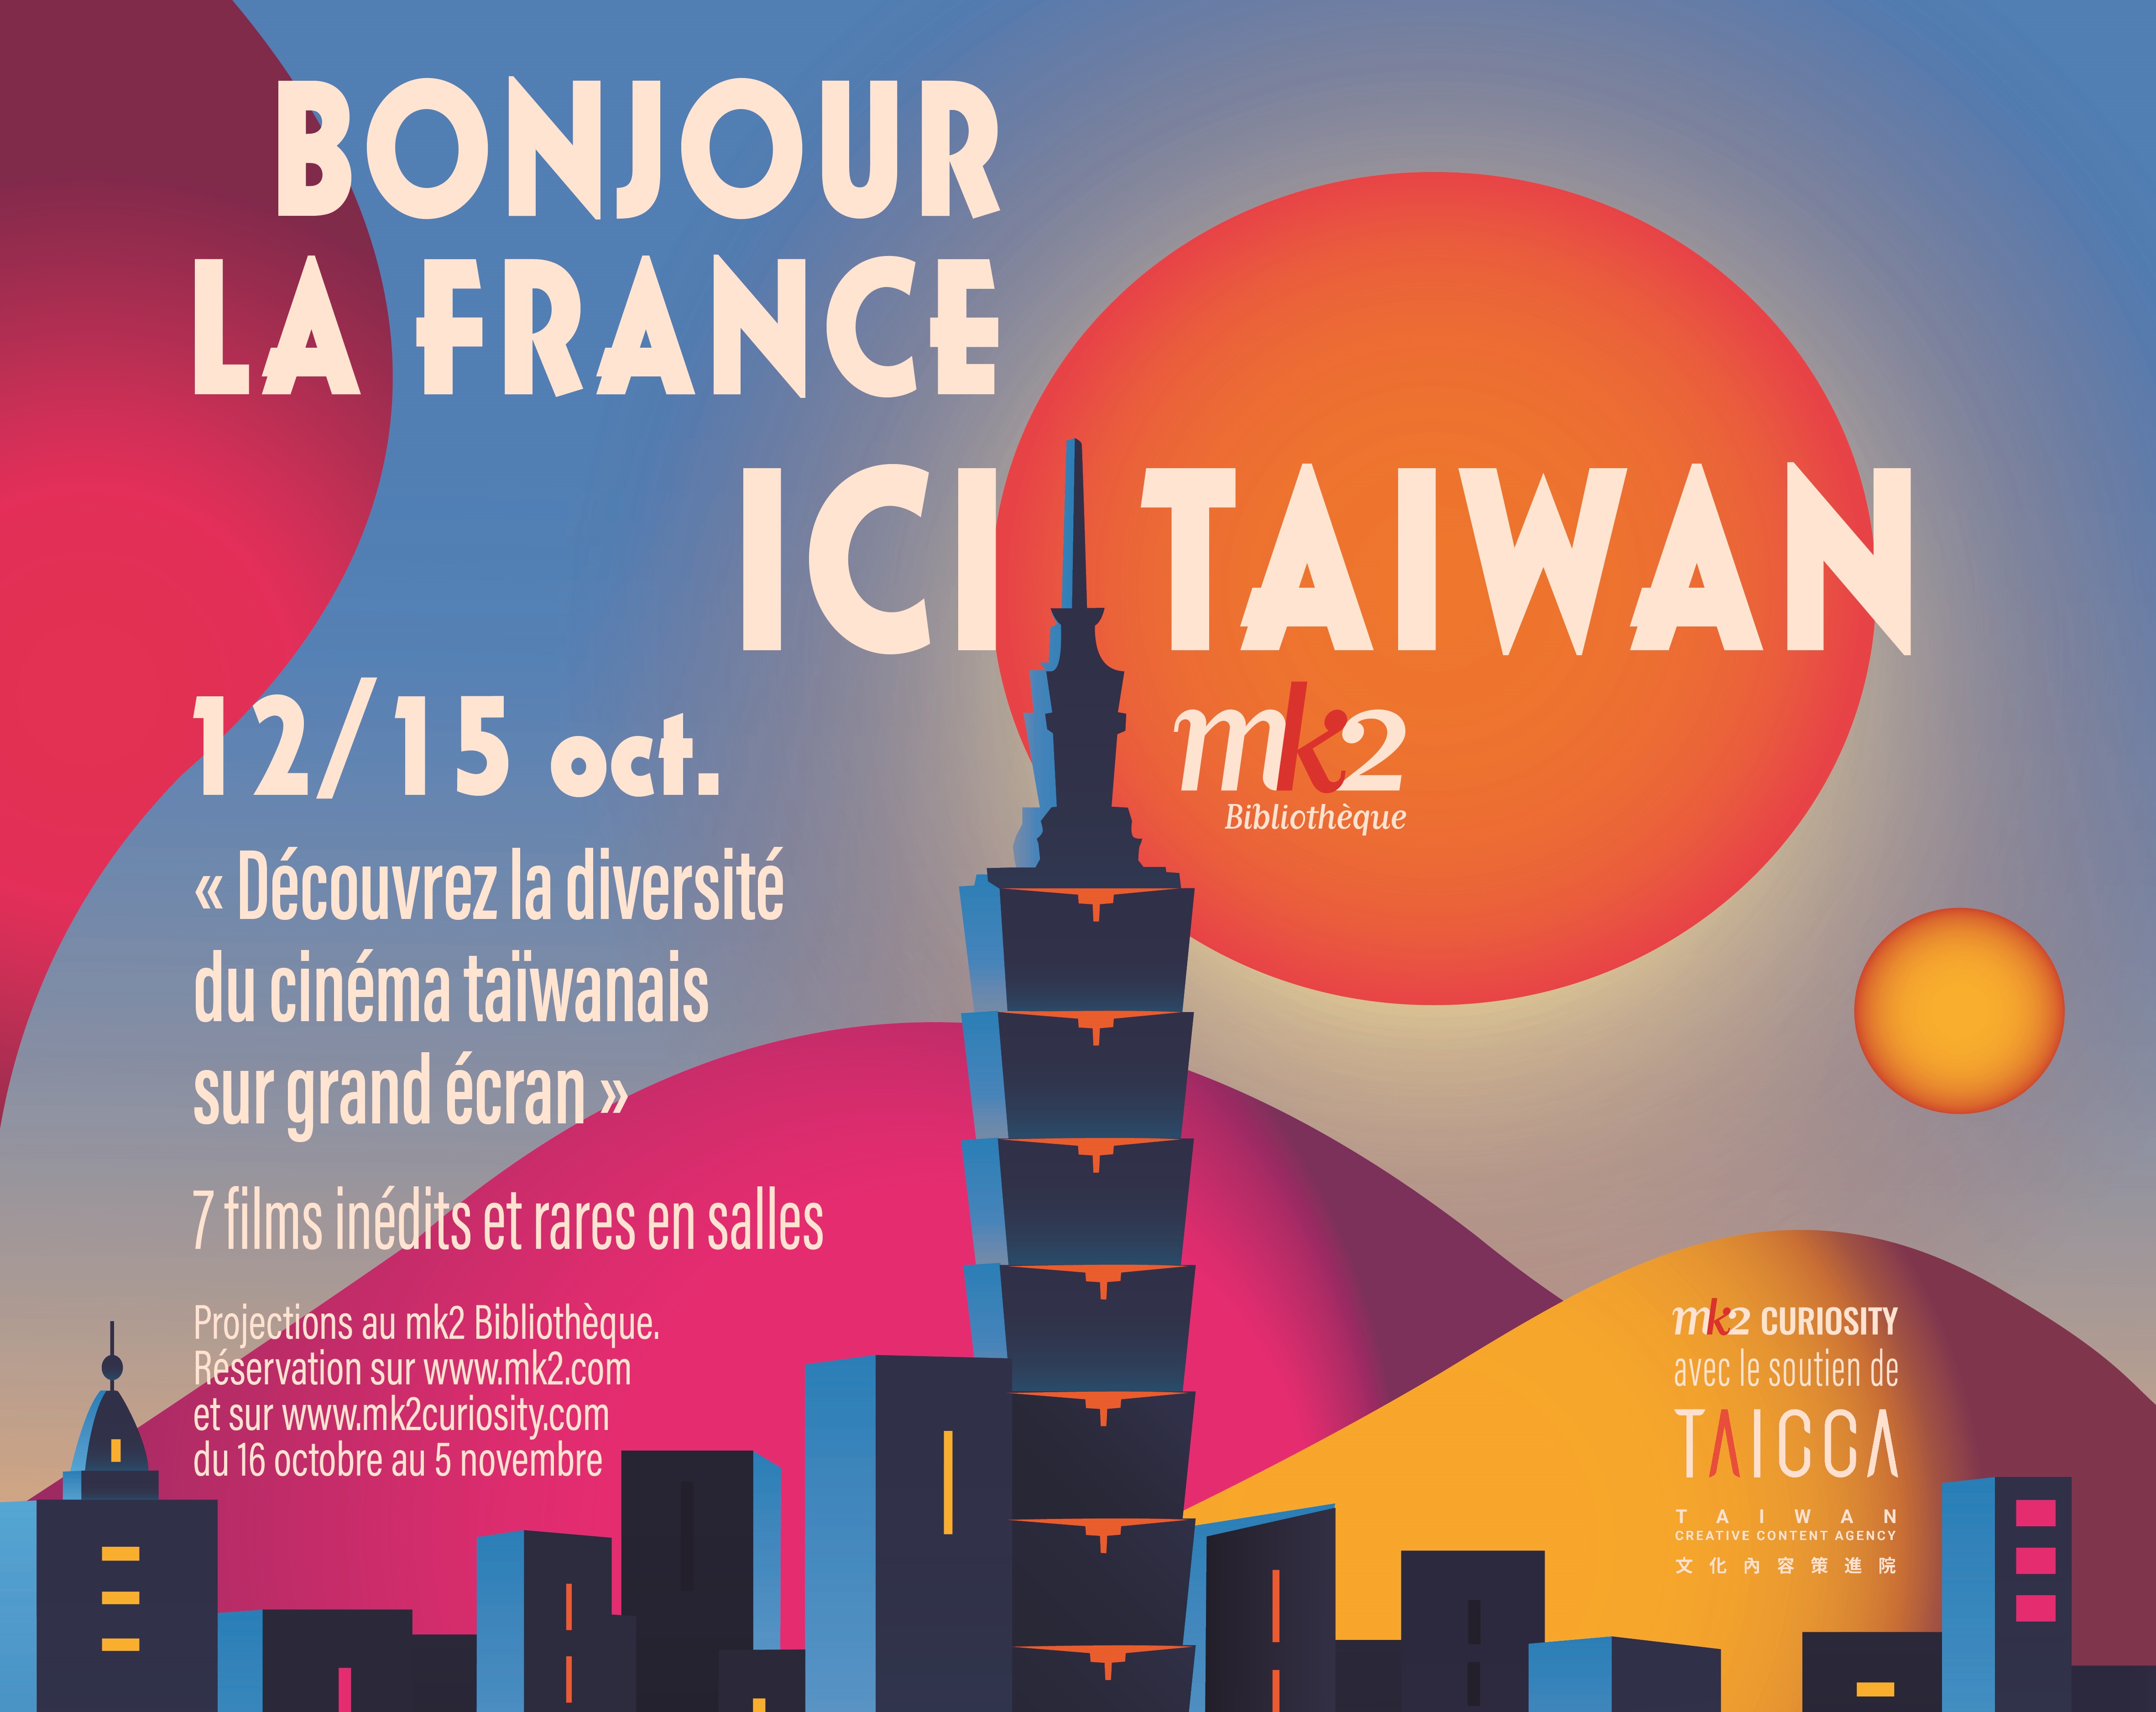 TAICCA and mk2 Present "Bonjour La France, ici Taïwan" - A Showcase of Taiwanese Films in France